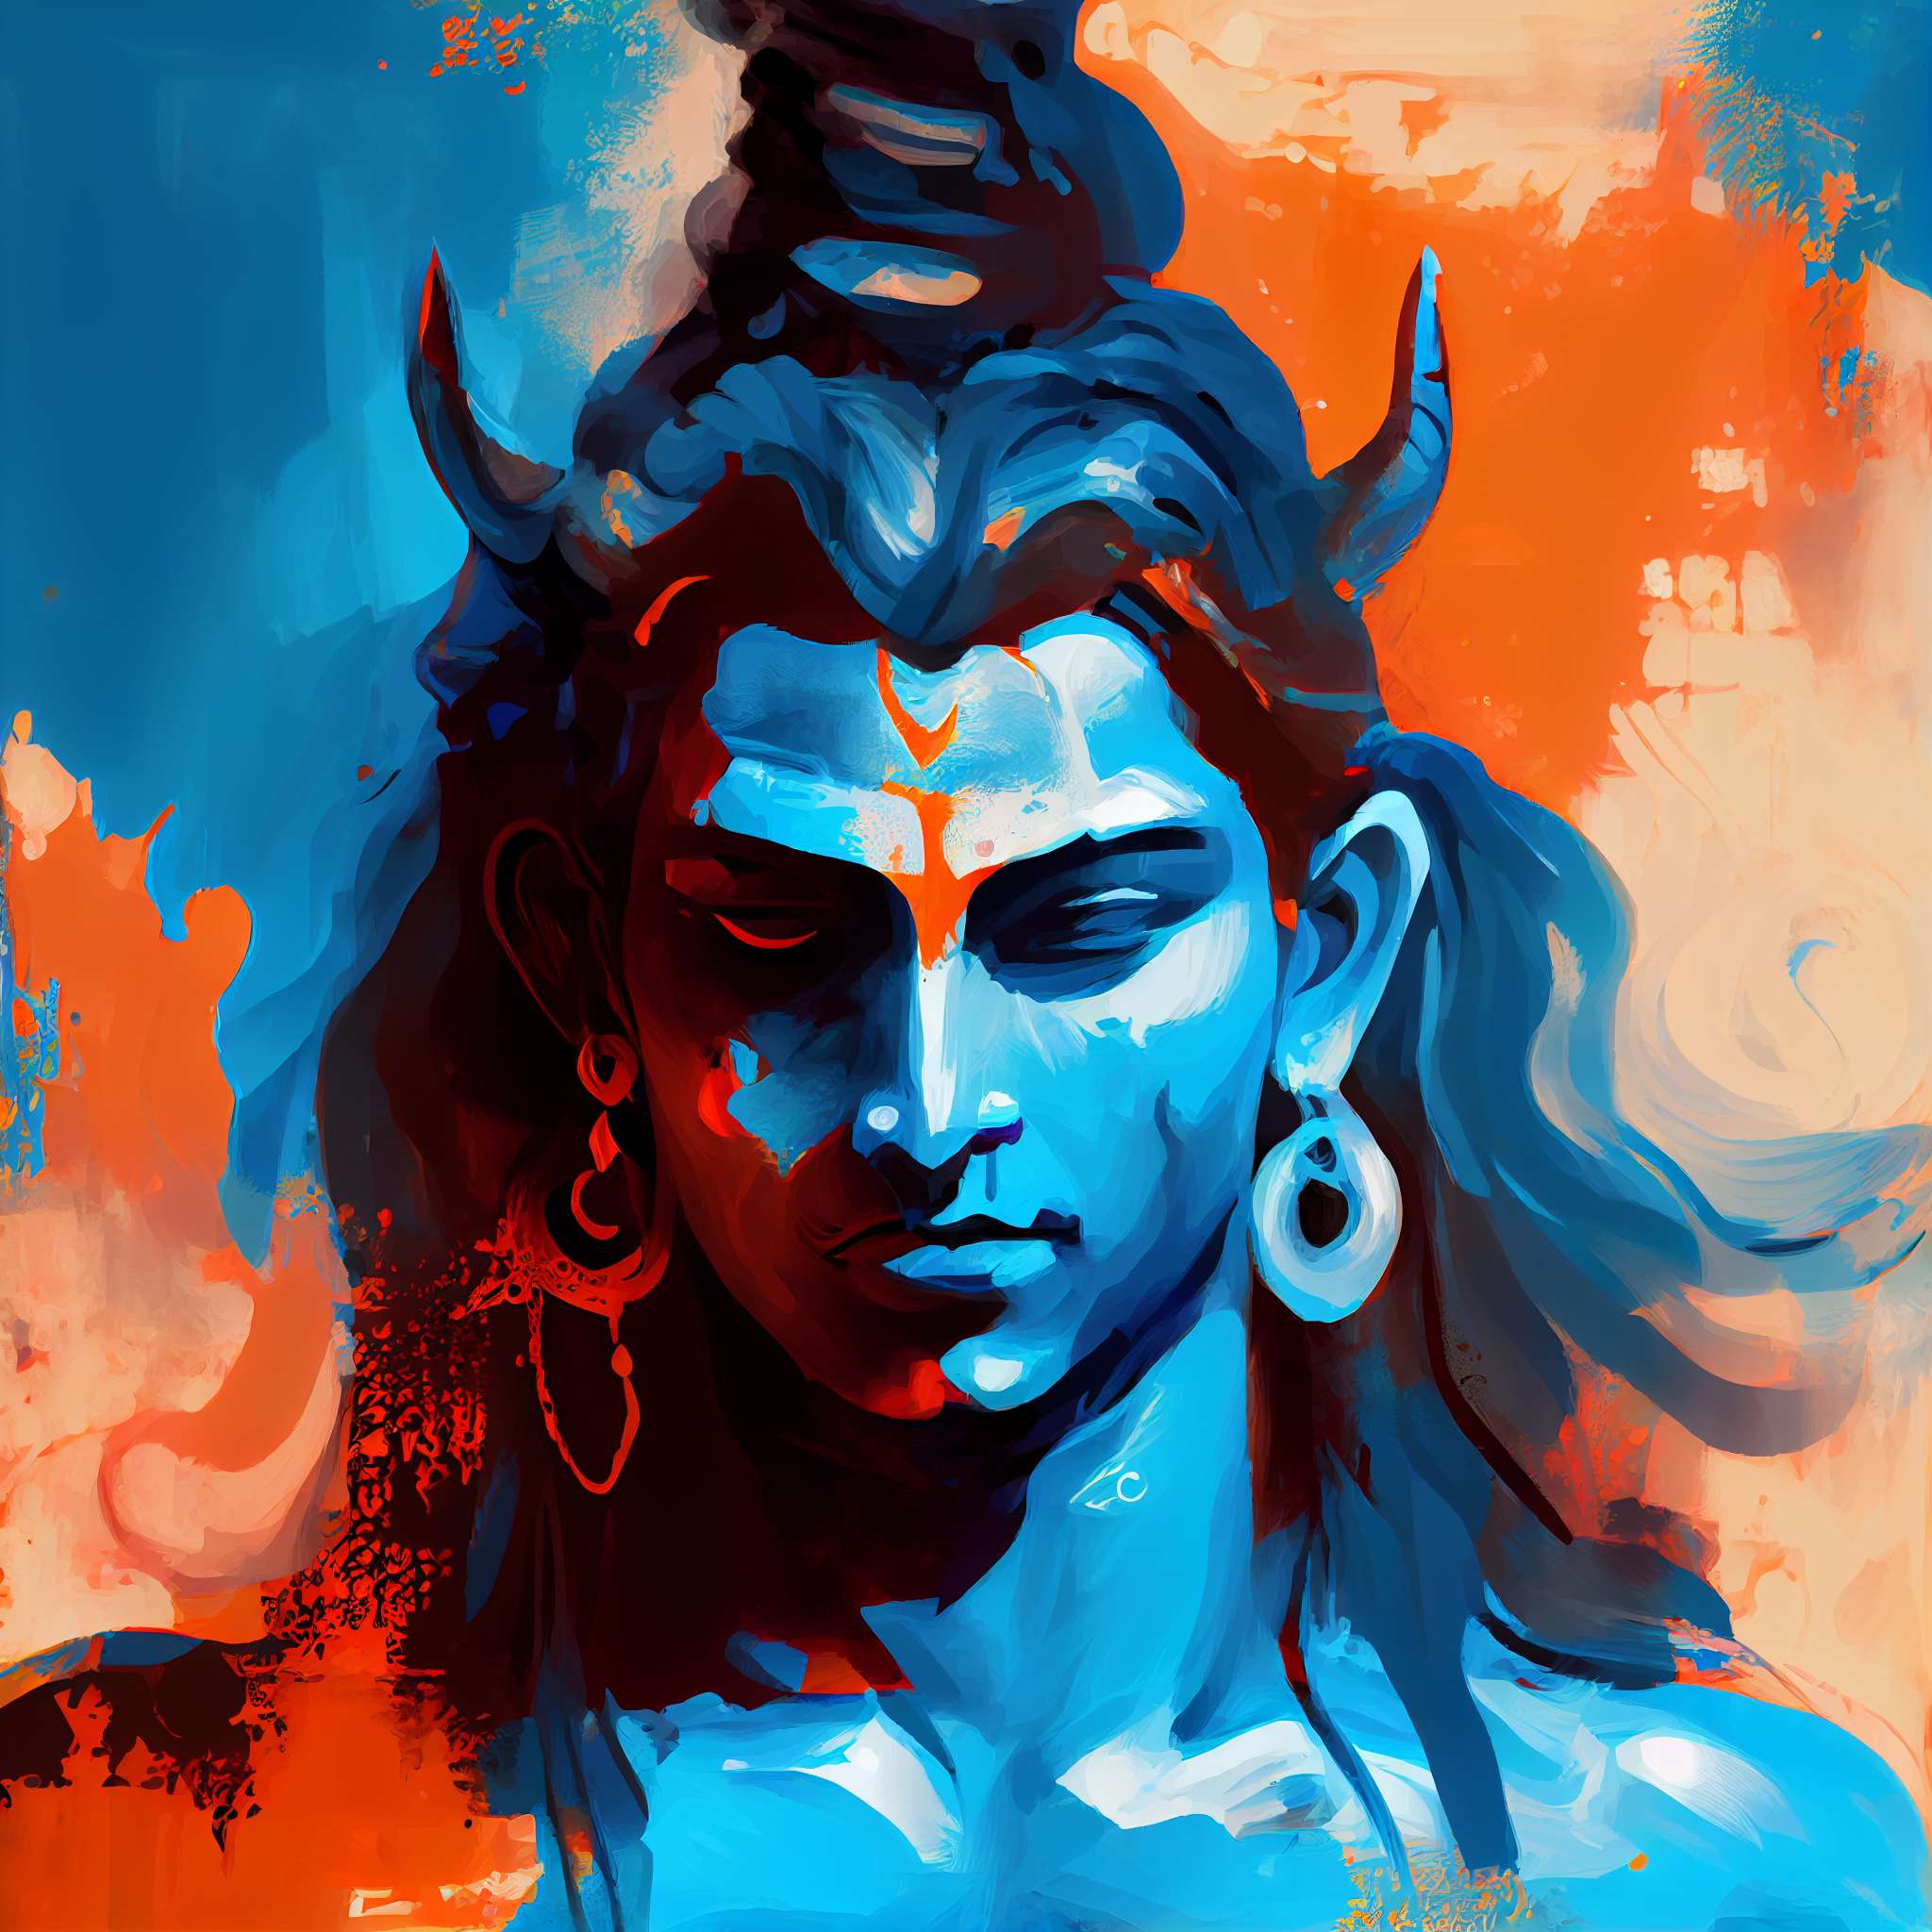 Meditative Blue: An Oil Paint Print of Lord Shiva in Deep Contemplation